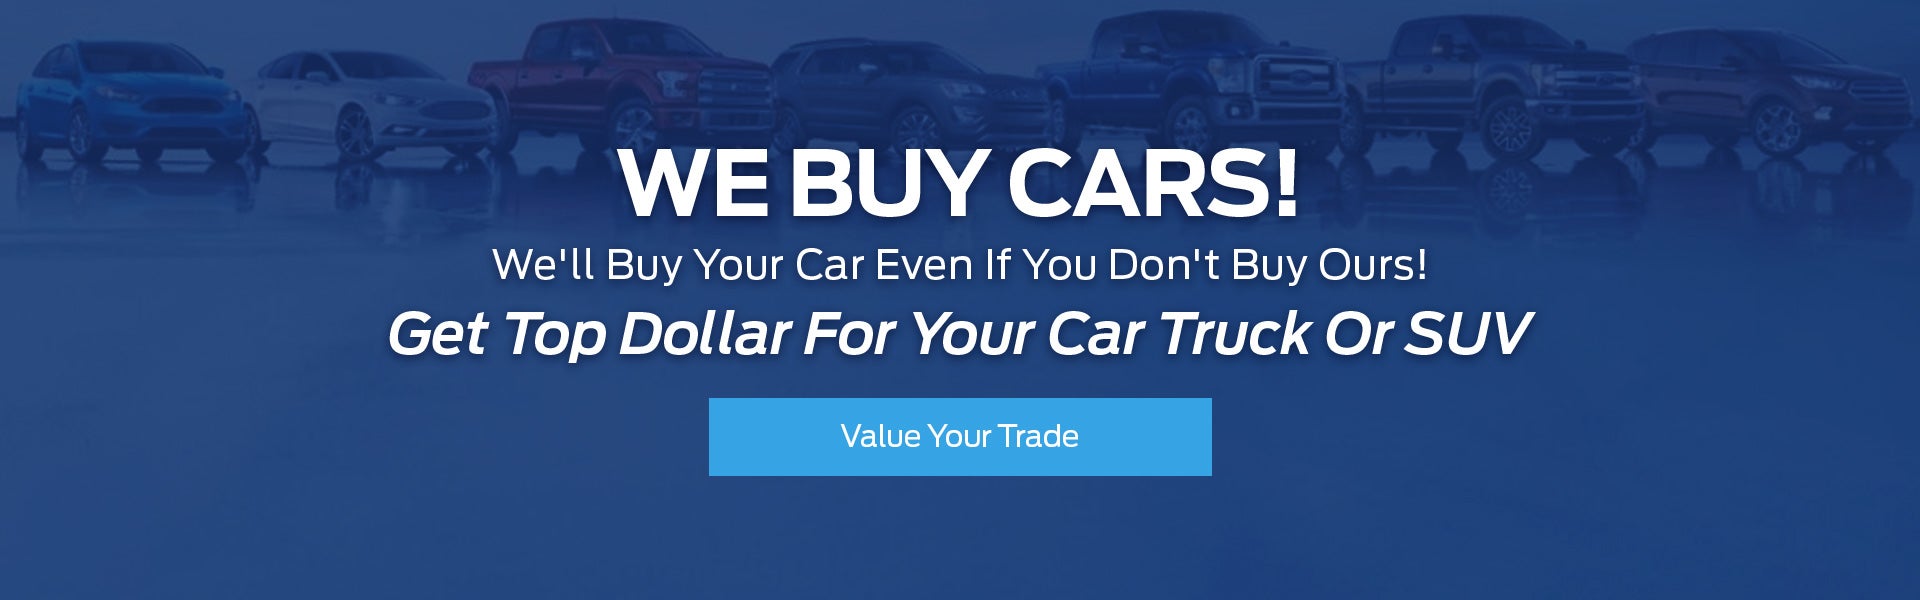 We Will Buy Your Car Even If You Don't Buy Ours